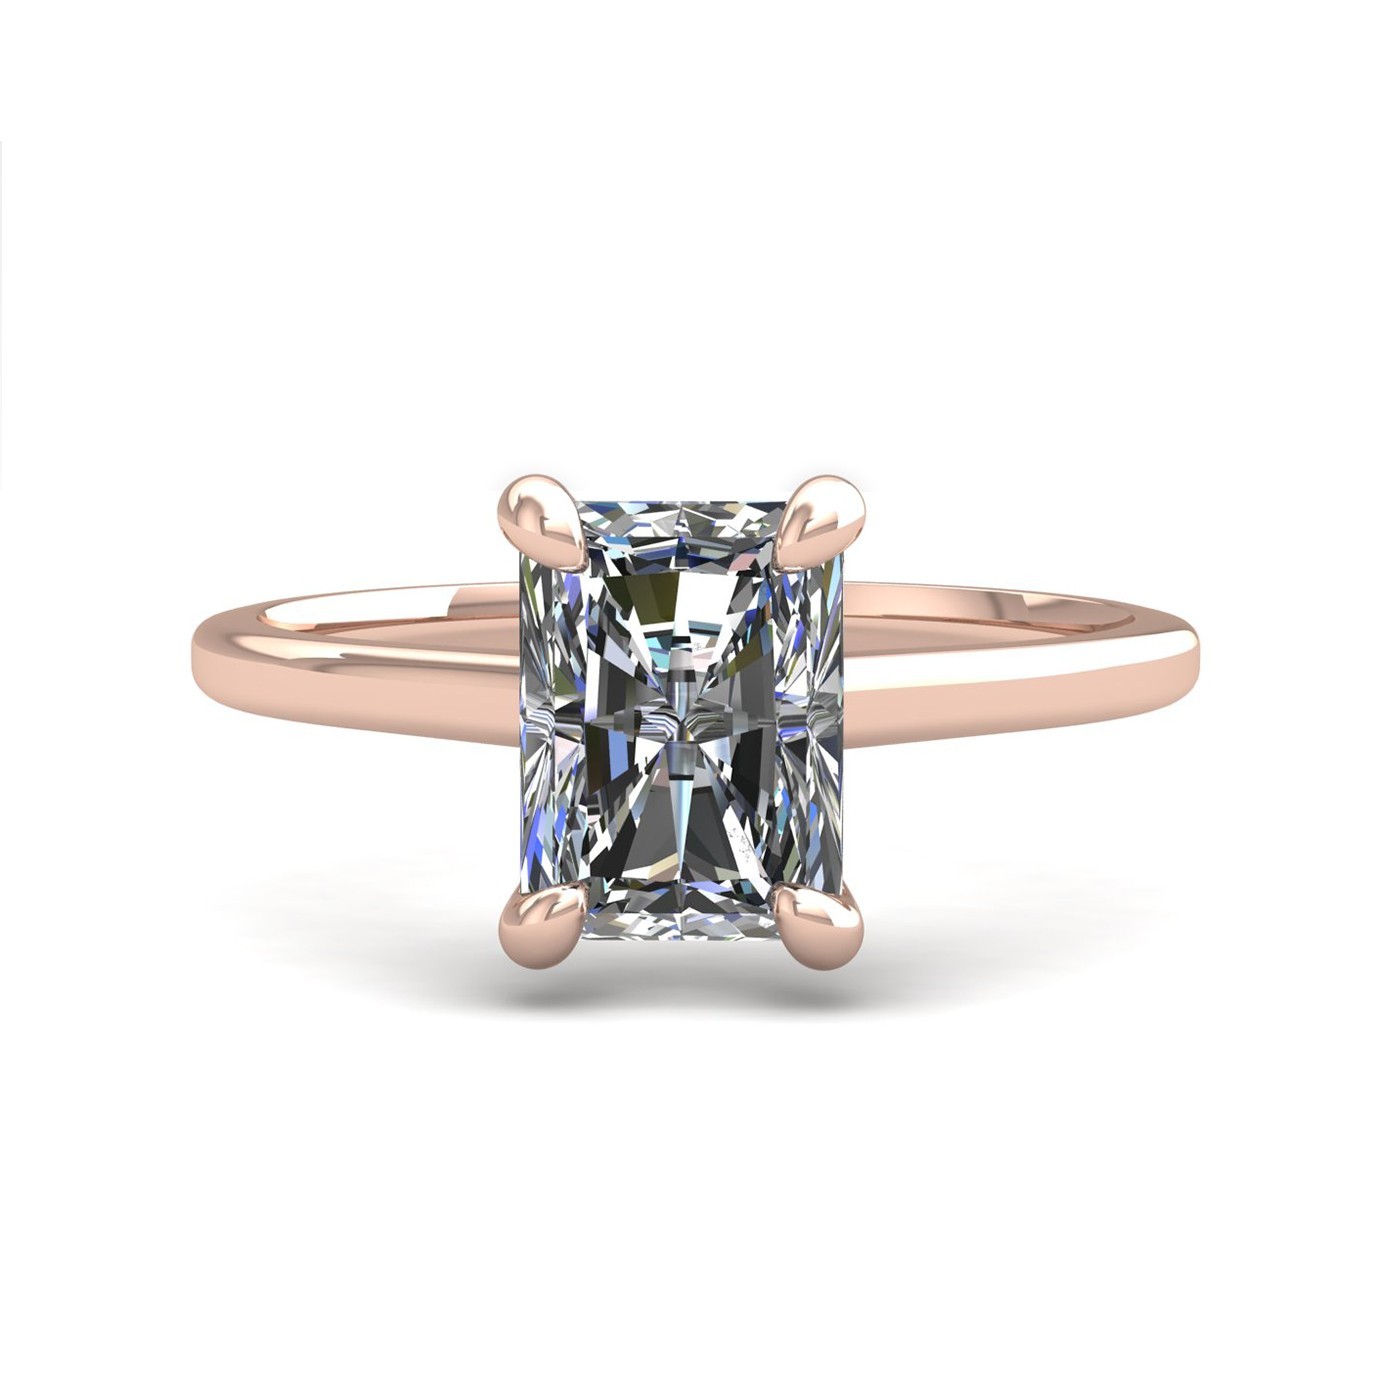 18k rose gold  0,80 ct 4 prongs solitaire radiant cut diamond engagement ring with whisper thin band Photos & images